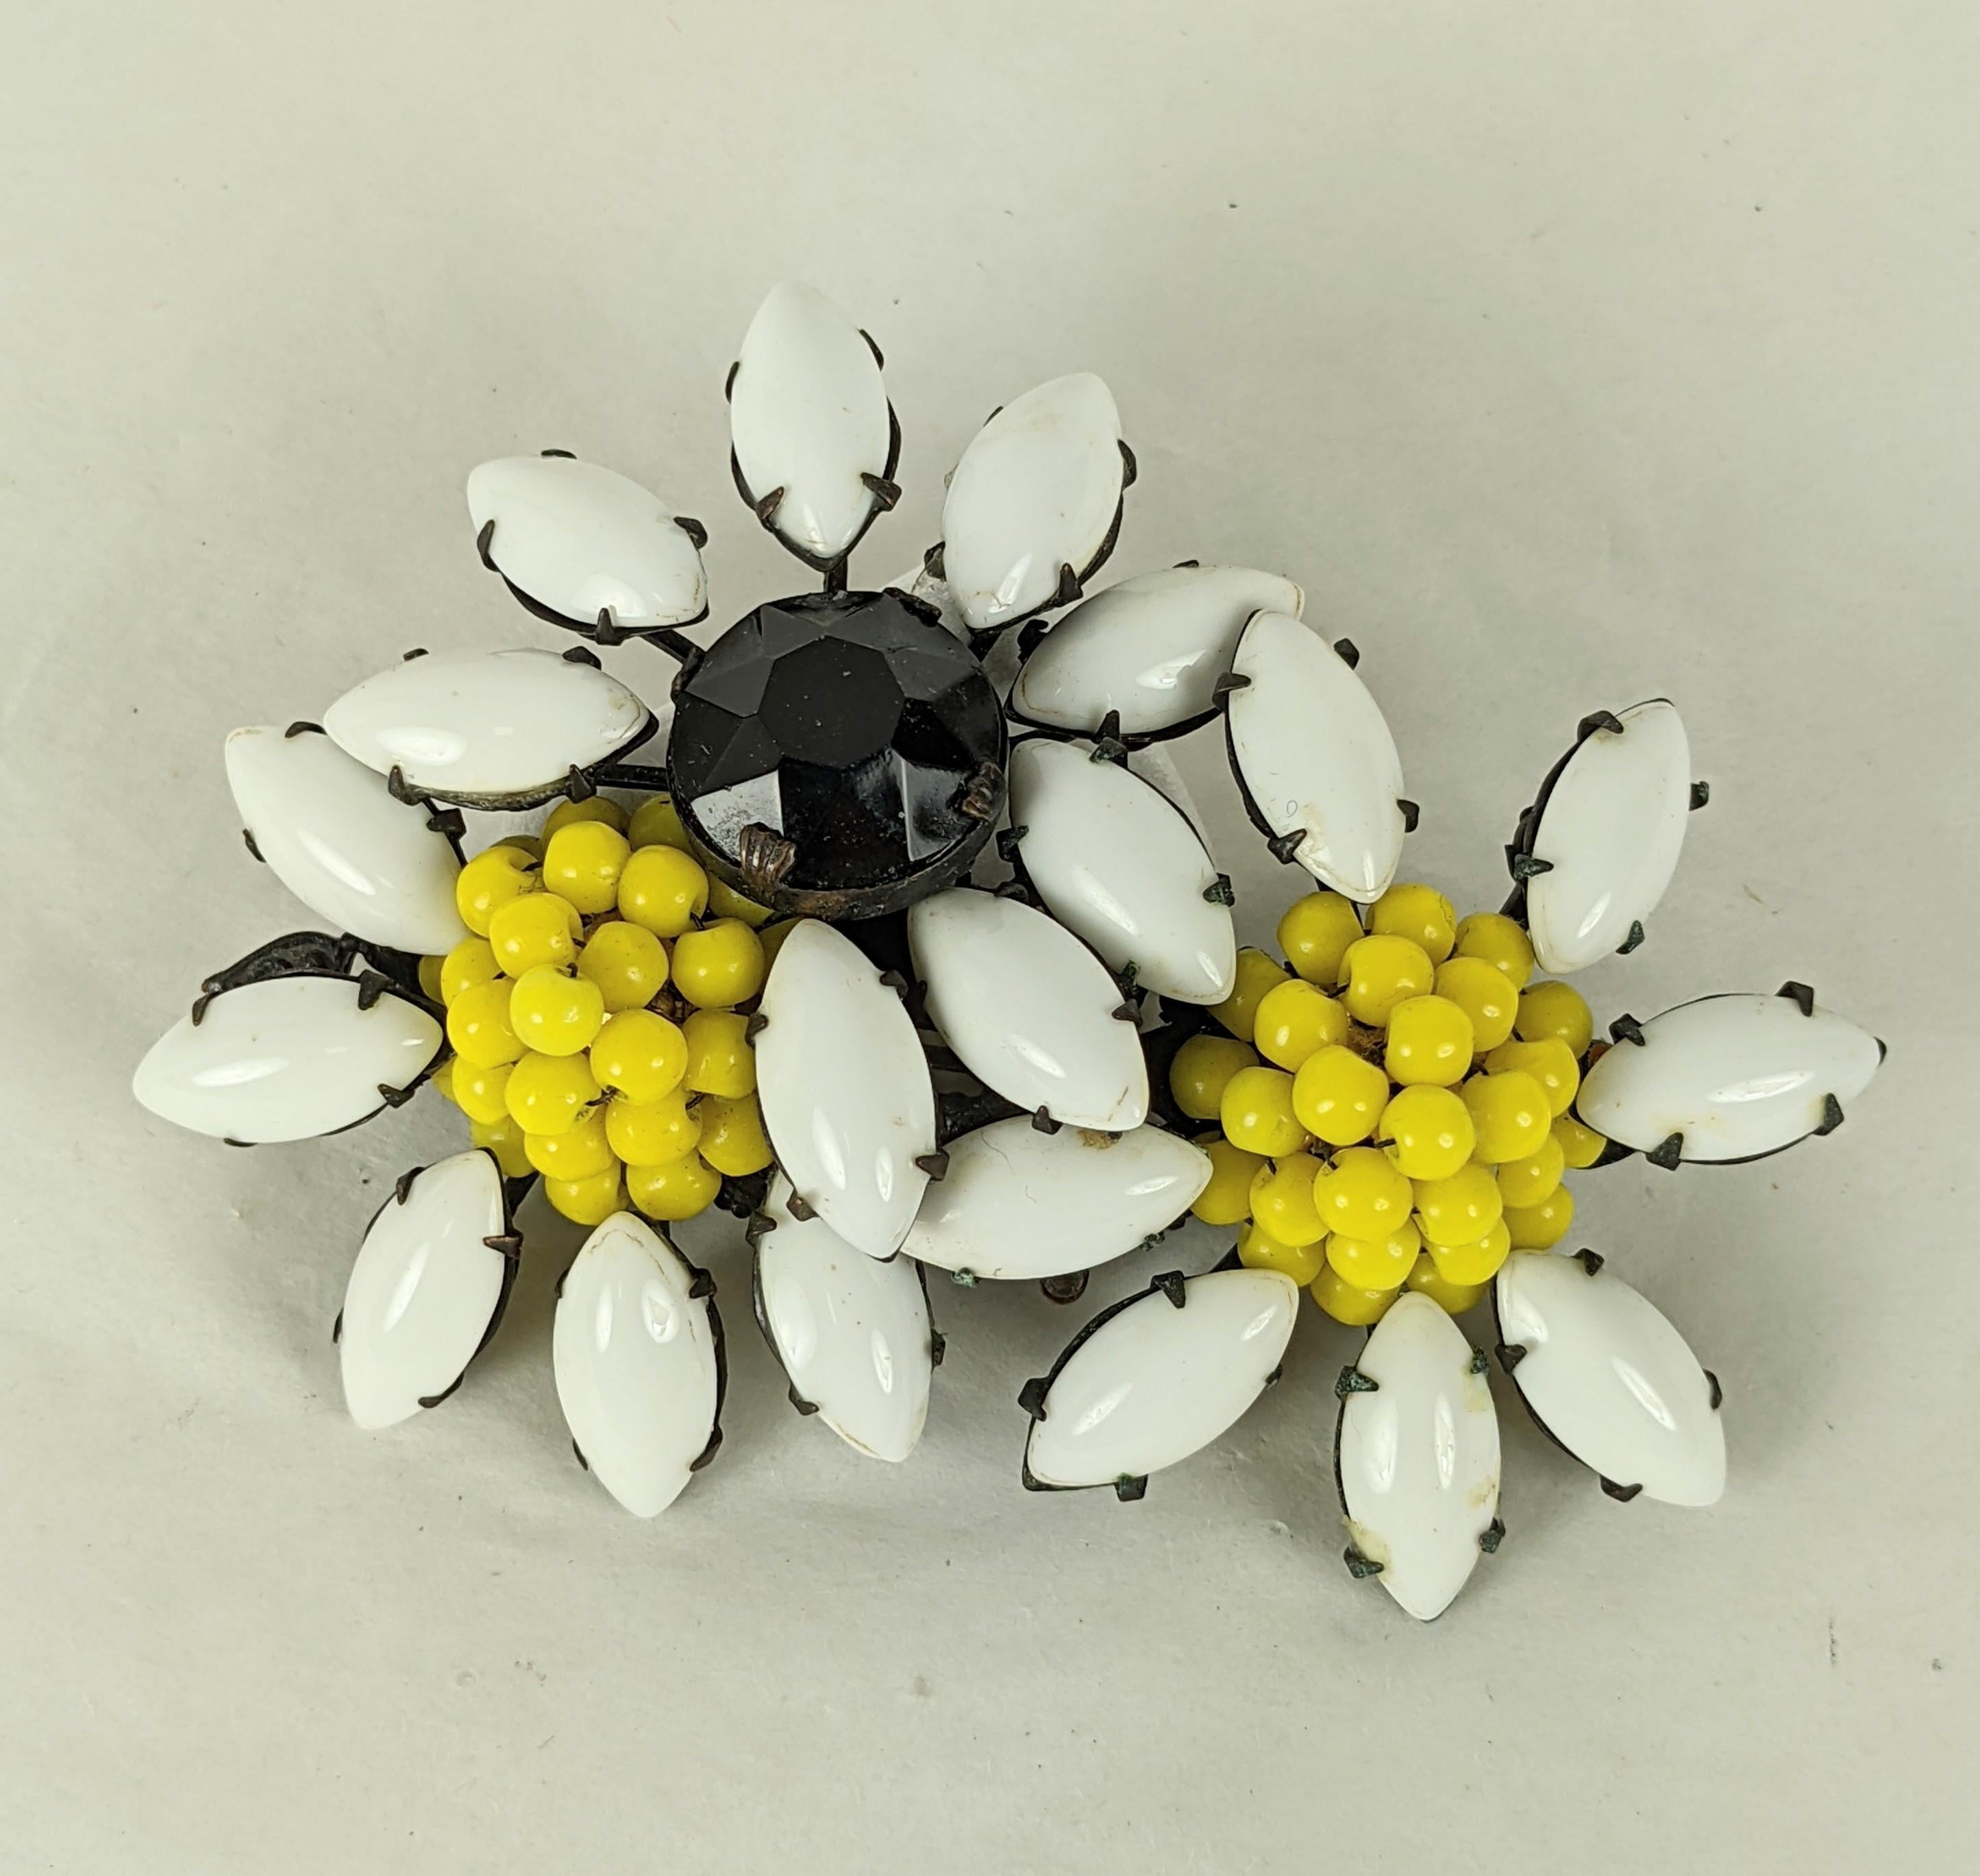 Miriam Haskell Daisy Cluster Brooch of milk glass navettes with embroidered chrome yellow bead centers and jet crystal, set in blackened metal. Signed, 1950's USA.
3.25